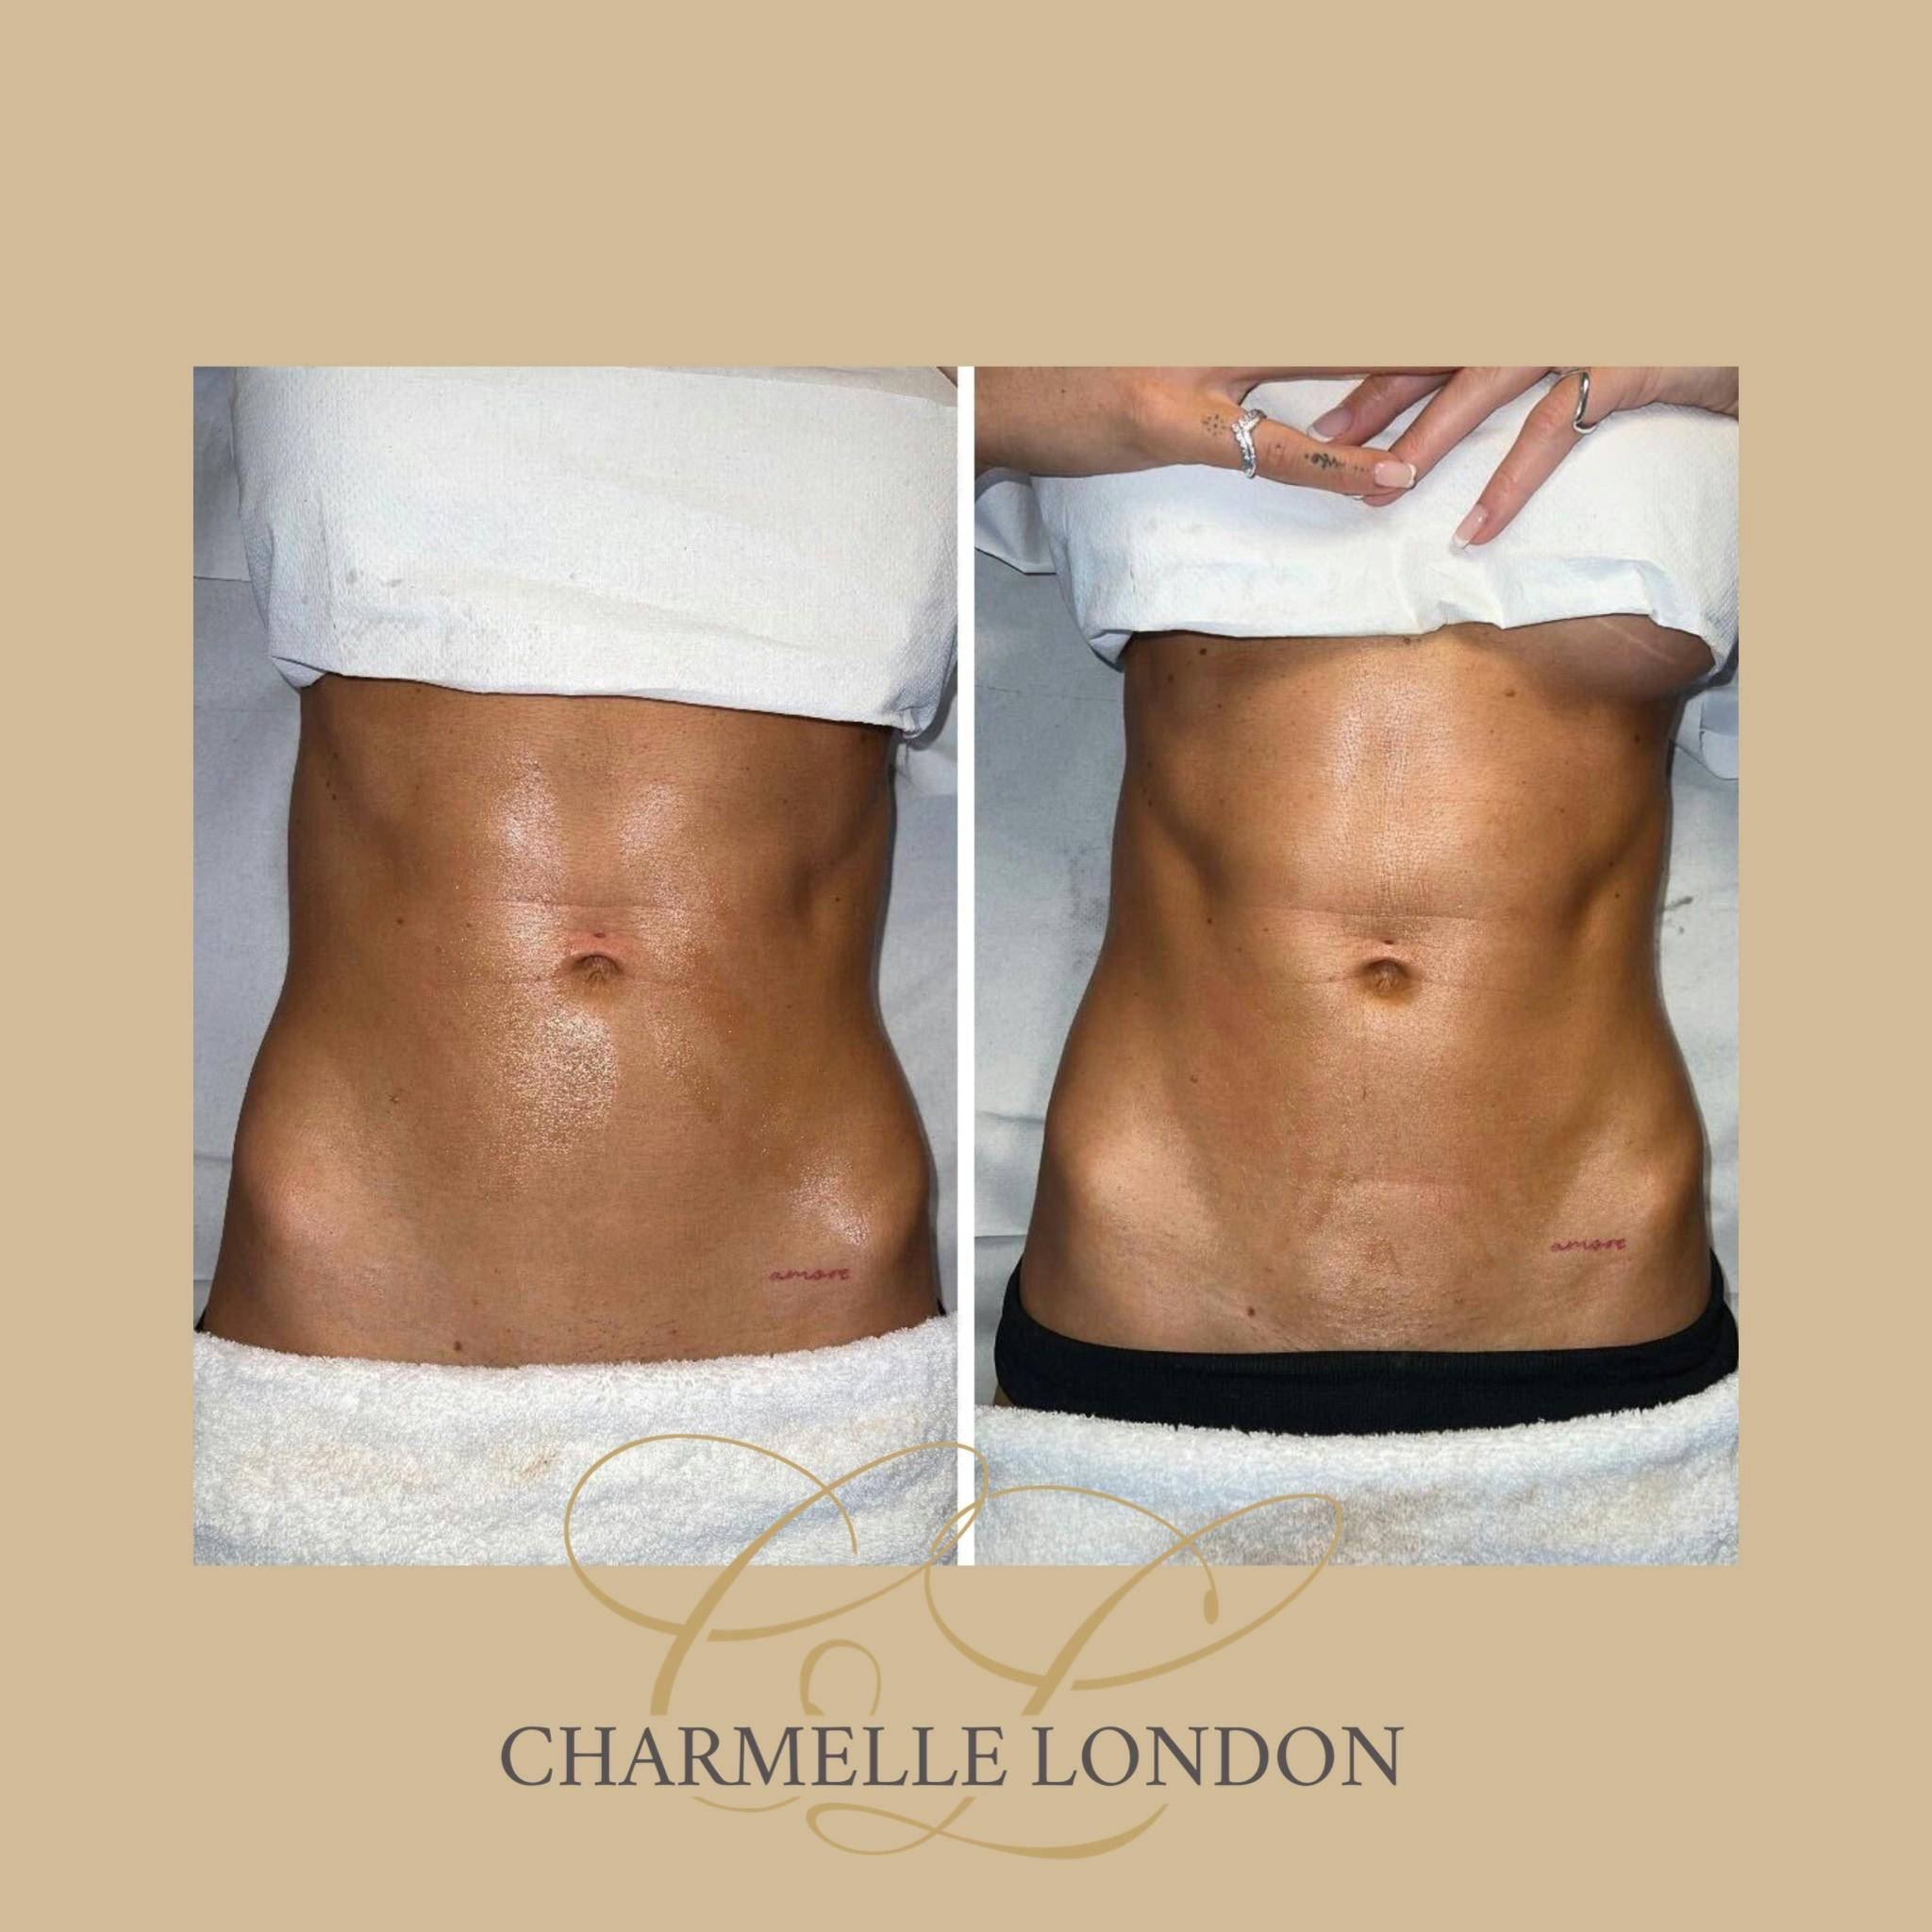 This treatment involves an individual or combined bespoke treatment using 3D-Cavitation, 3D-Radio Frequency, 3D-Shockwave and manual lymphatic massage